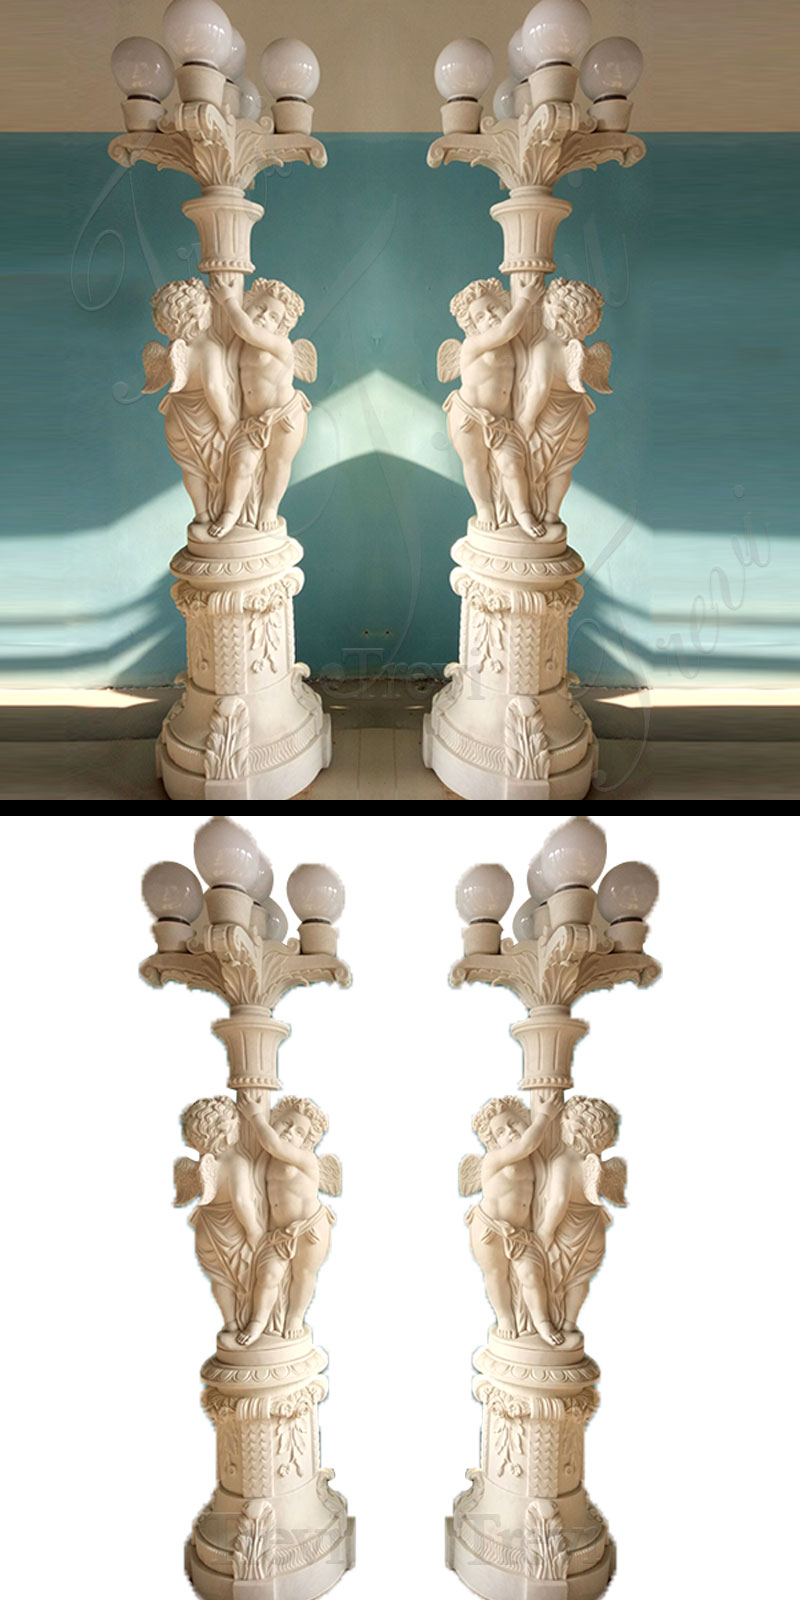 Marble Angel Statues with the Lamp